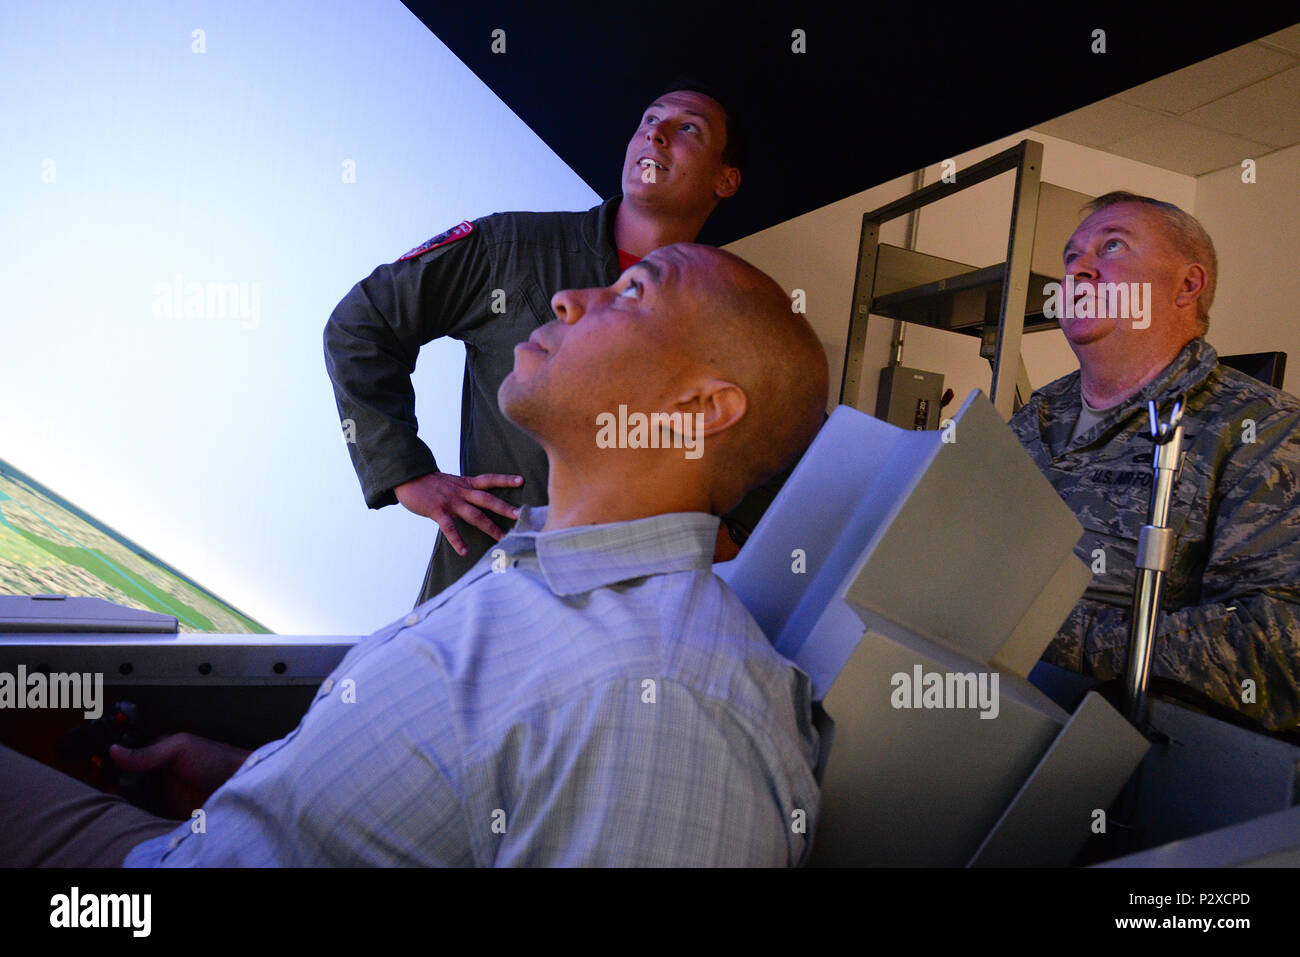 U.S. Sen. Cory Booker, center, looks up at a target in an F-16 simulator while U.S. Air Force 1st Lt. Nicholas Loglisci, fighter pilot, and Brig. Gen. Michael L. Cunniff, the Adjutant General of the New Jersey National Guard, right, observe at the 177th Fighter Wing in Egg Harbor Township, N.J. on Aug. 5, 2016. During  Sen. Booker's first visit to the 177th FW, he also received a briefing by the Wing Commander, U.S. Air Force Col. John R. DiDonna, and got a chance to get an up close look at an F-16C Fighting Falcon fighter jet on the flight line at the Atlantic City Air National Guard base. (U Stock Photo